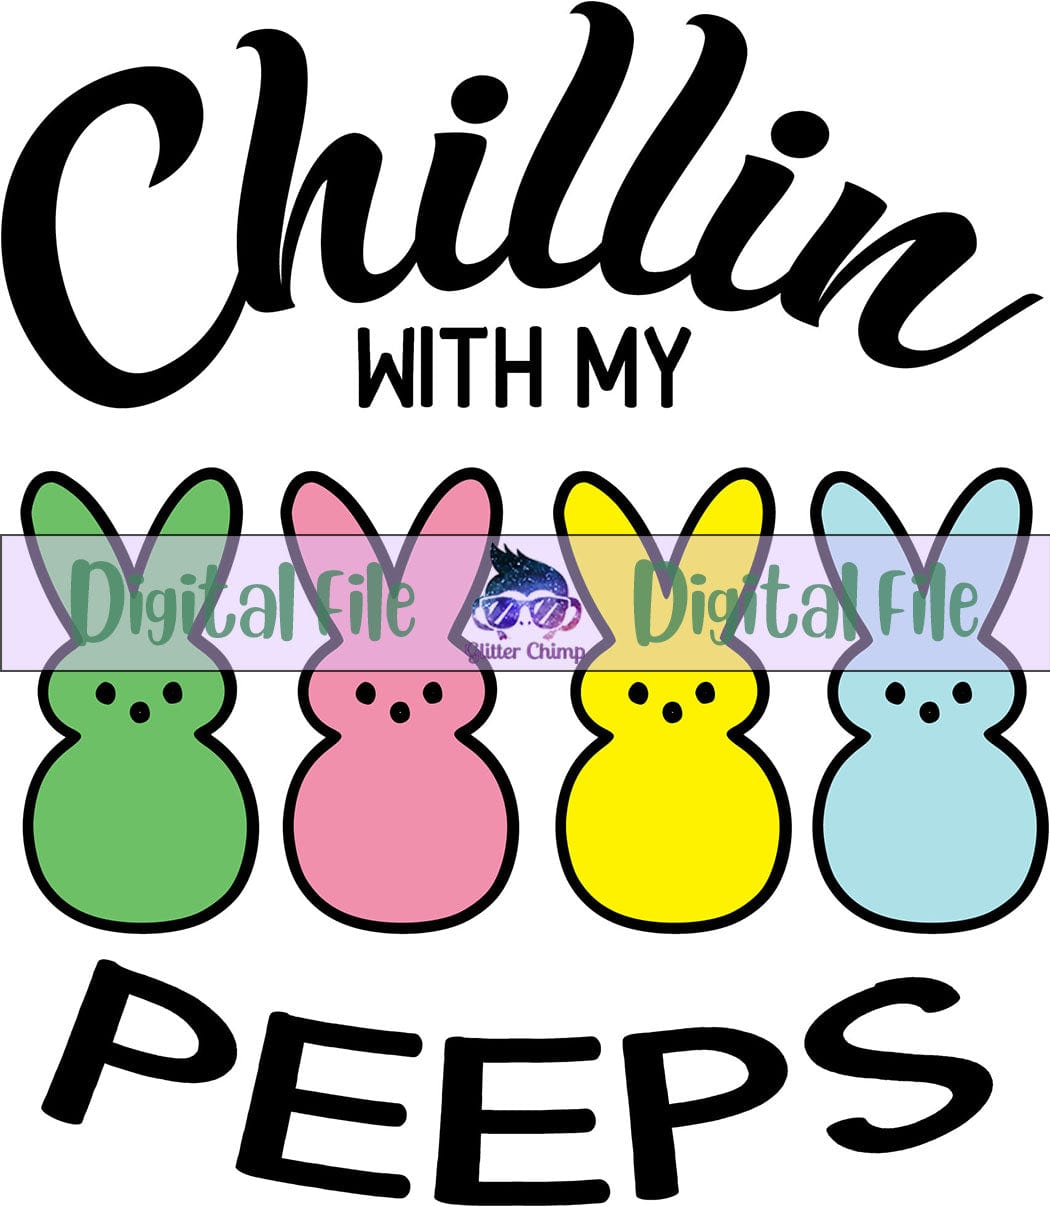 Chillin With My Peeps - Digital File